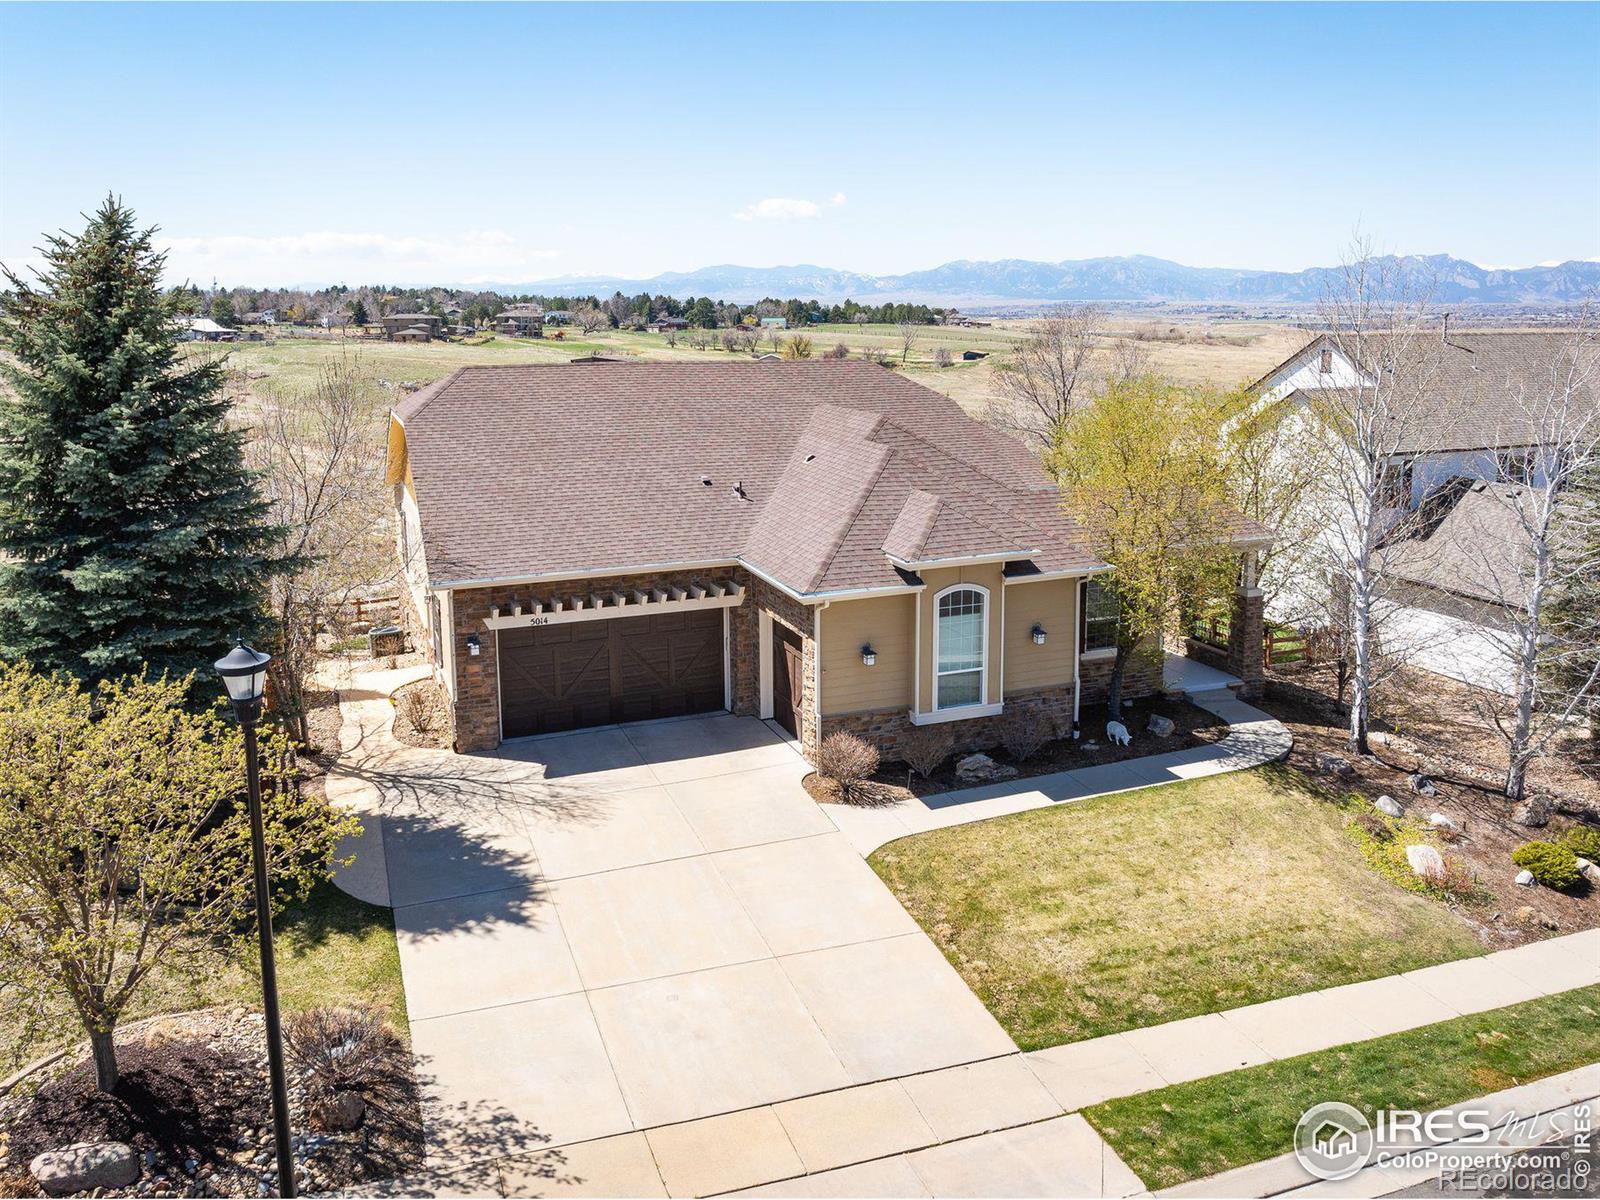 5014  Silver Feather Way, broomfield MLS: 4567891006814 Beds: 4 Baths: 3 Price: $1,250,000